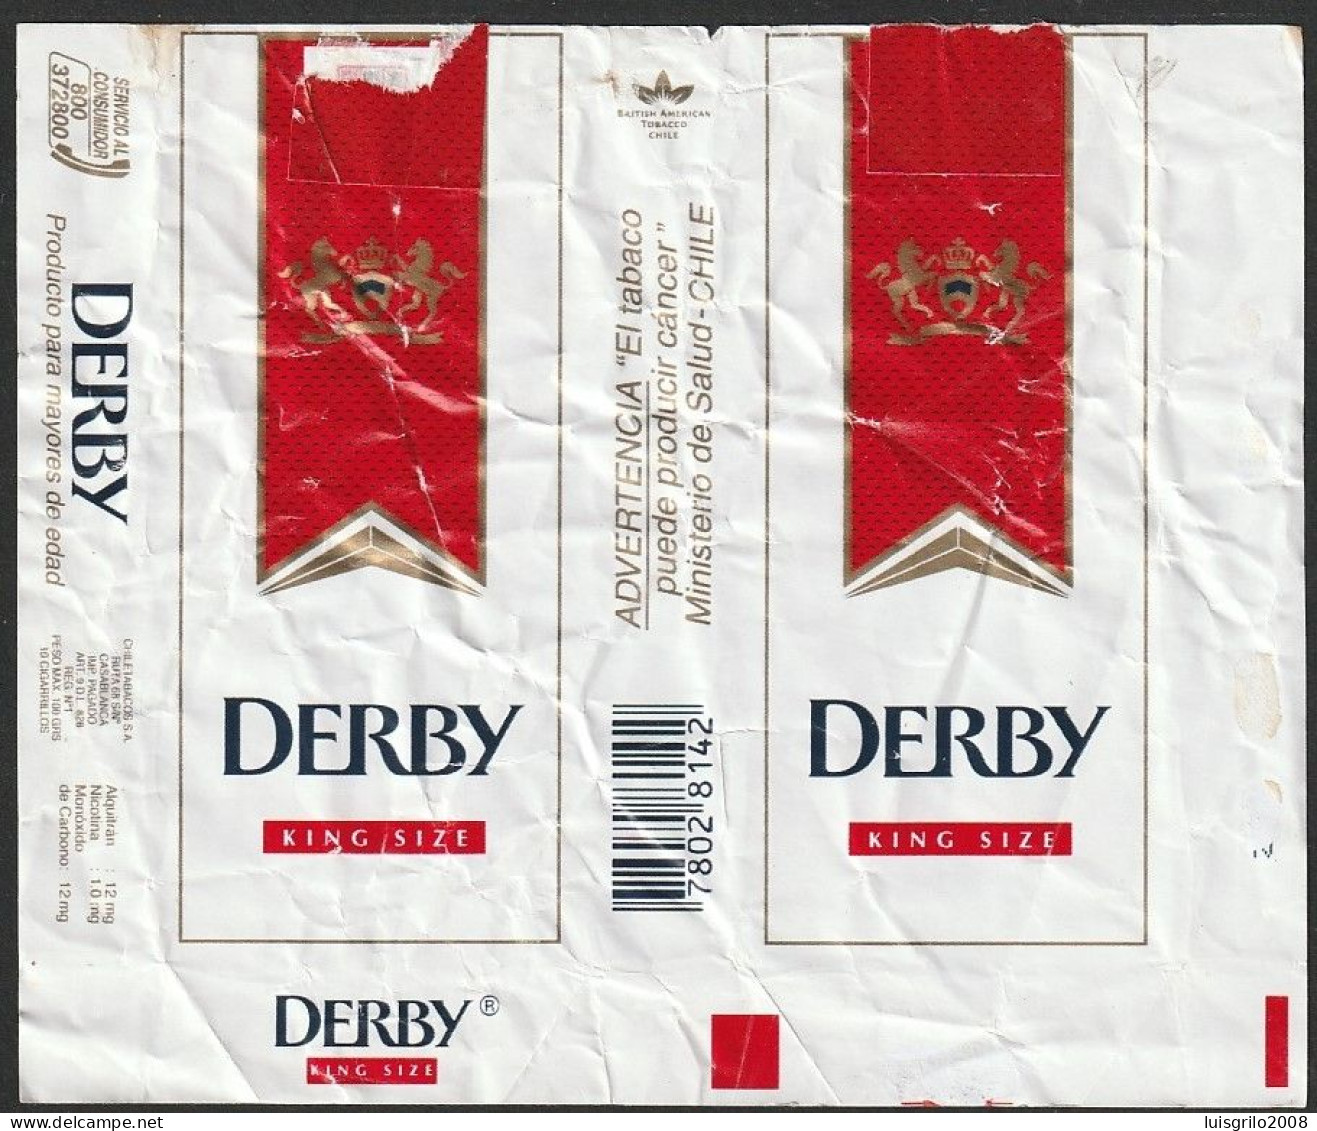 Chile, Old Cigarrette Pack - DERBY King Size -|- Chile Tabacos - Boites à Tabac Vides